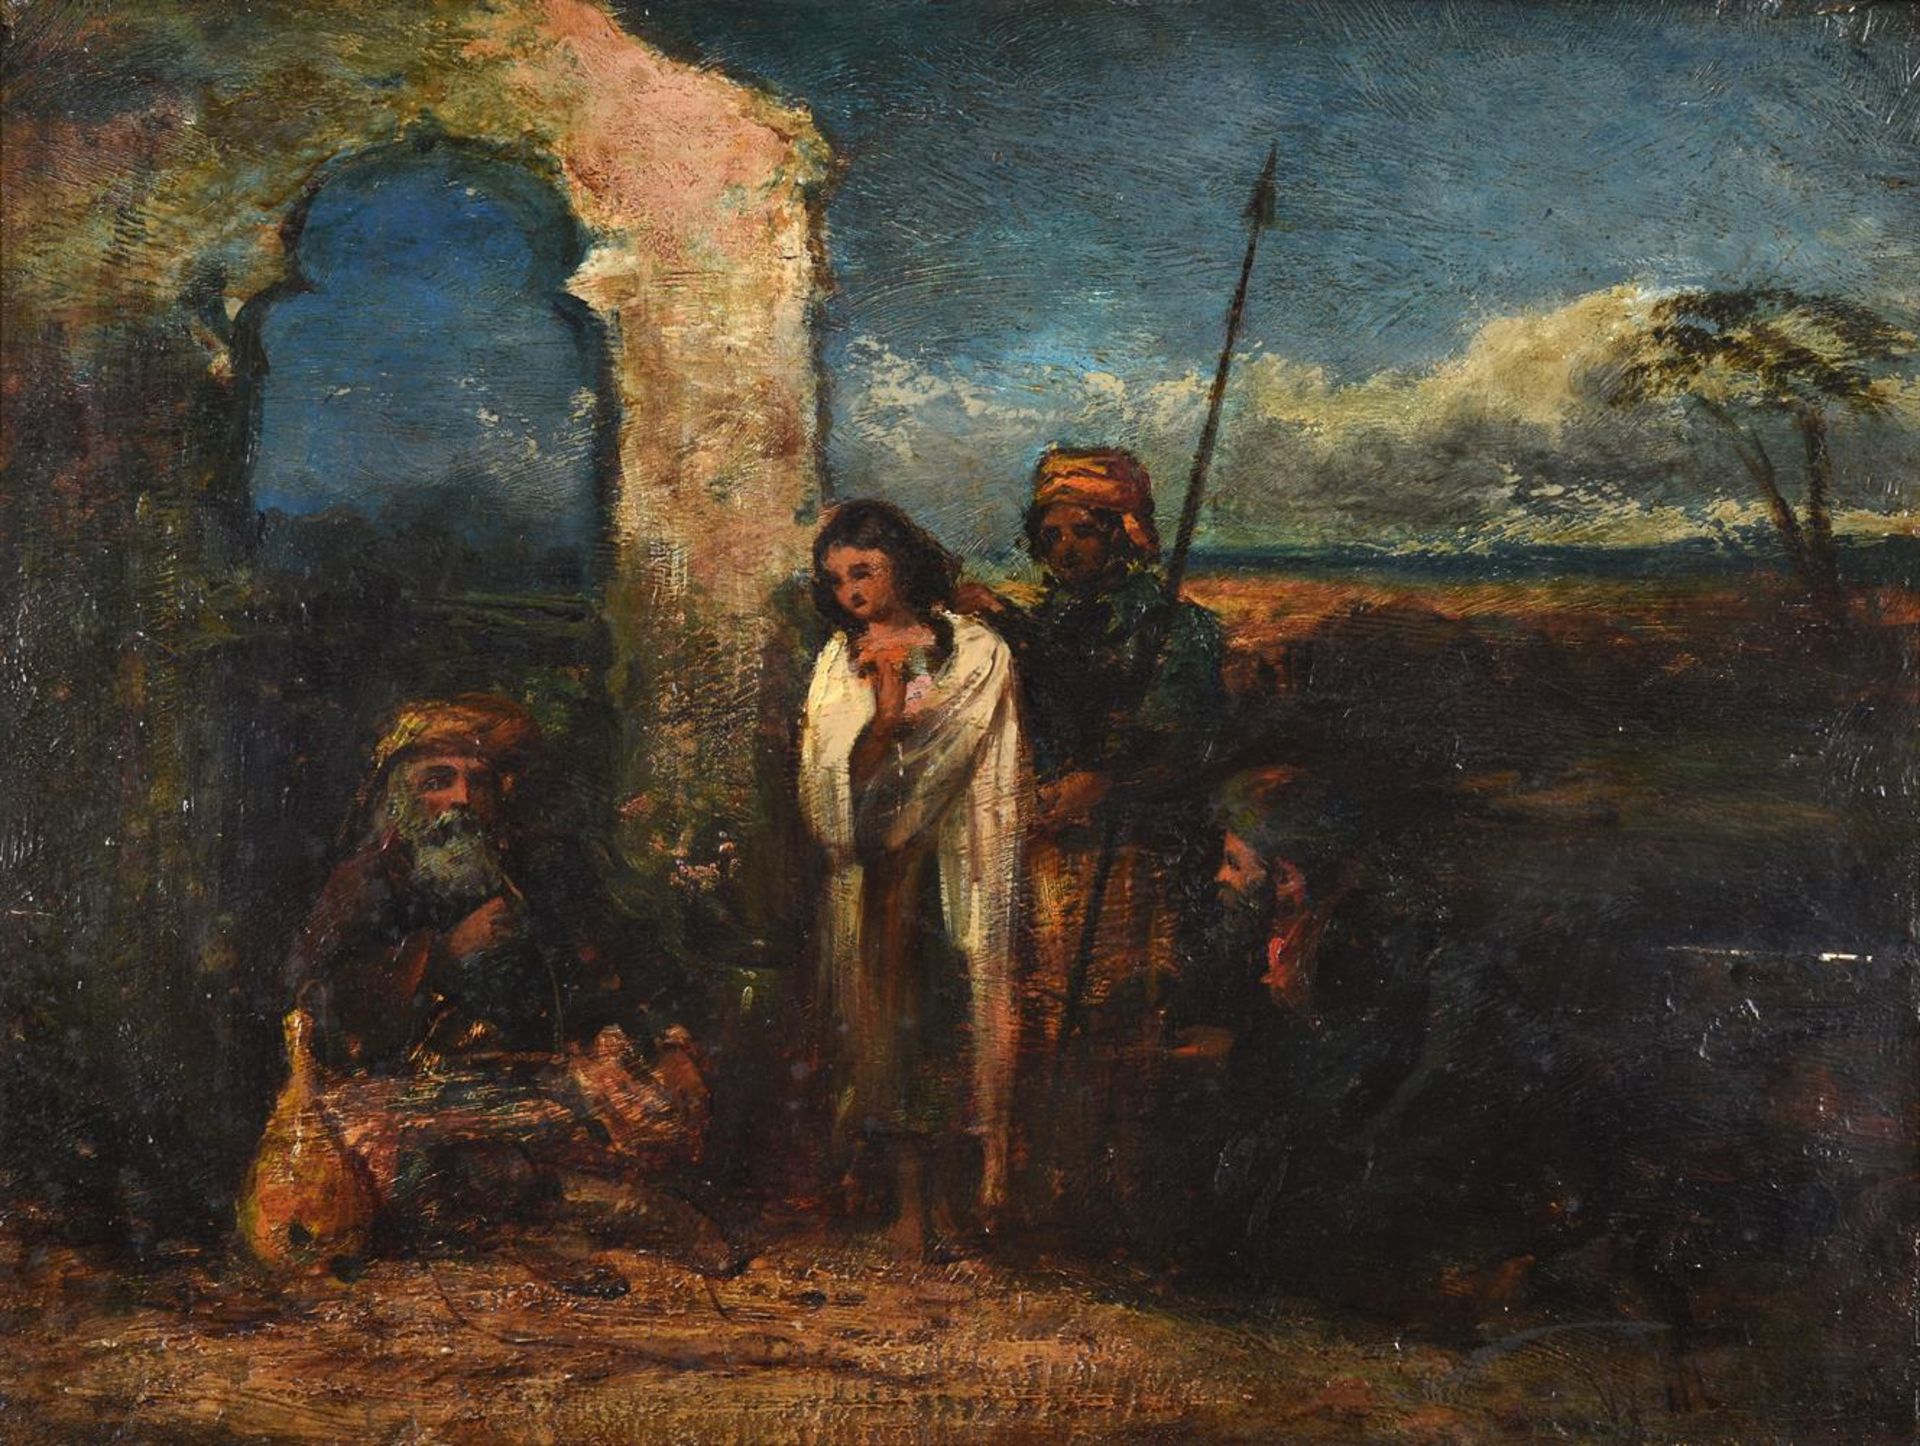 WILLIAM JAMES MULLER (BRITISH 1812-1845), ARAB FIGURES BY A RUIN